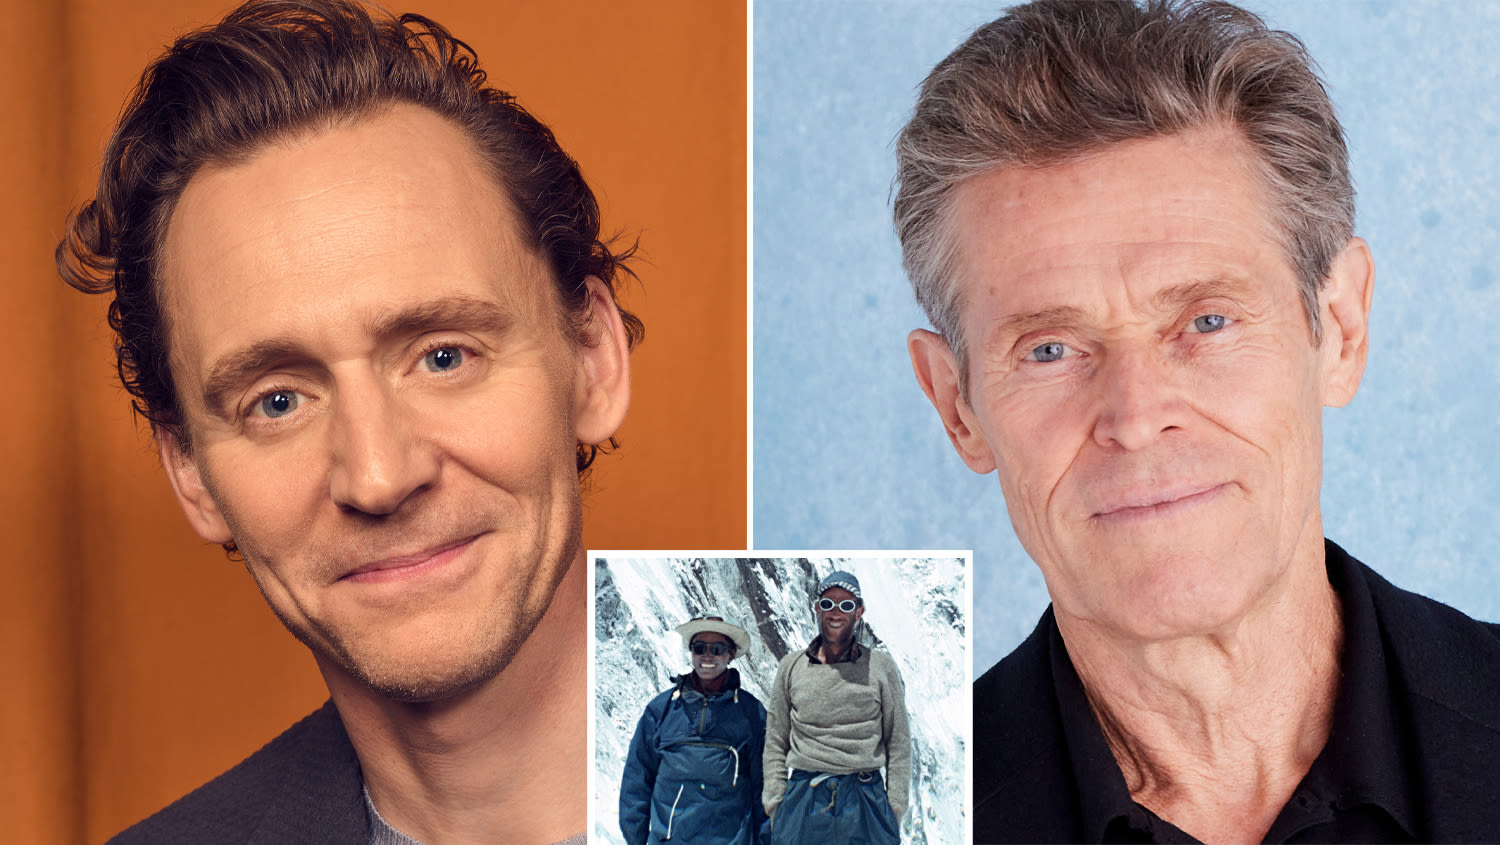 ...Tenzing’ About The First Climbers To Conquer Everest; Willem Dafoe Also Aboard See-Saw Films Pic With Hunt...